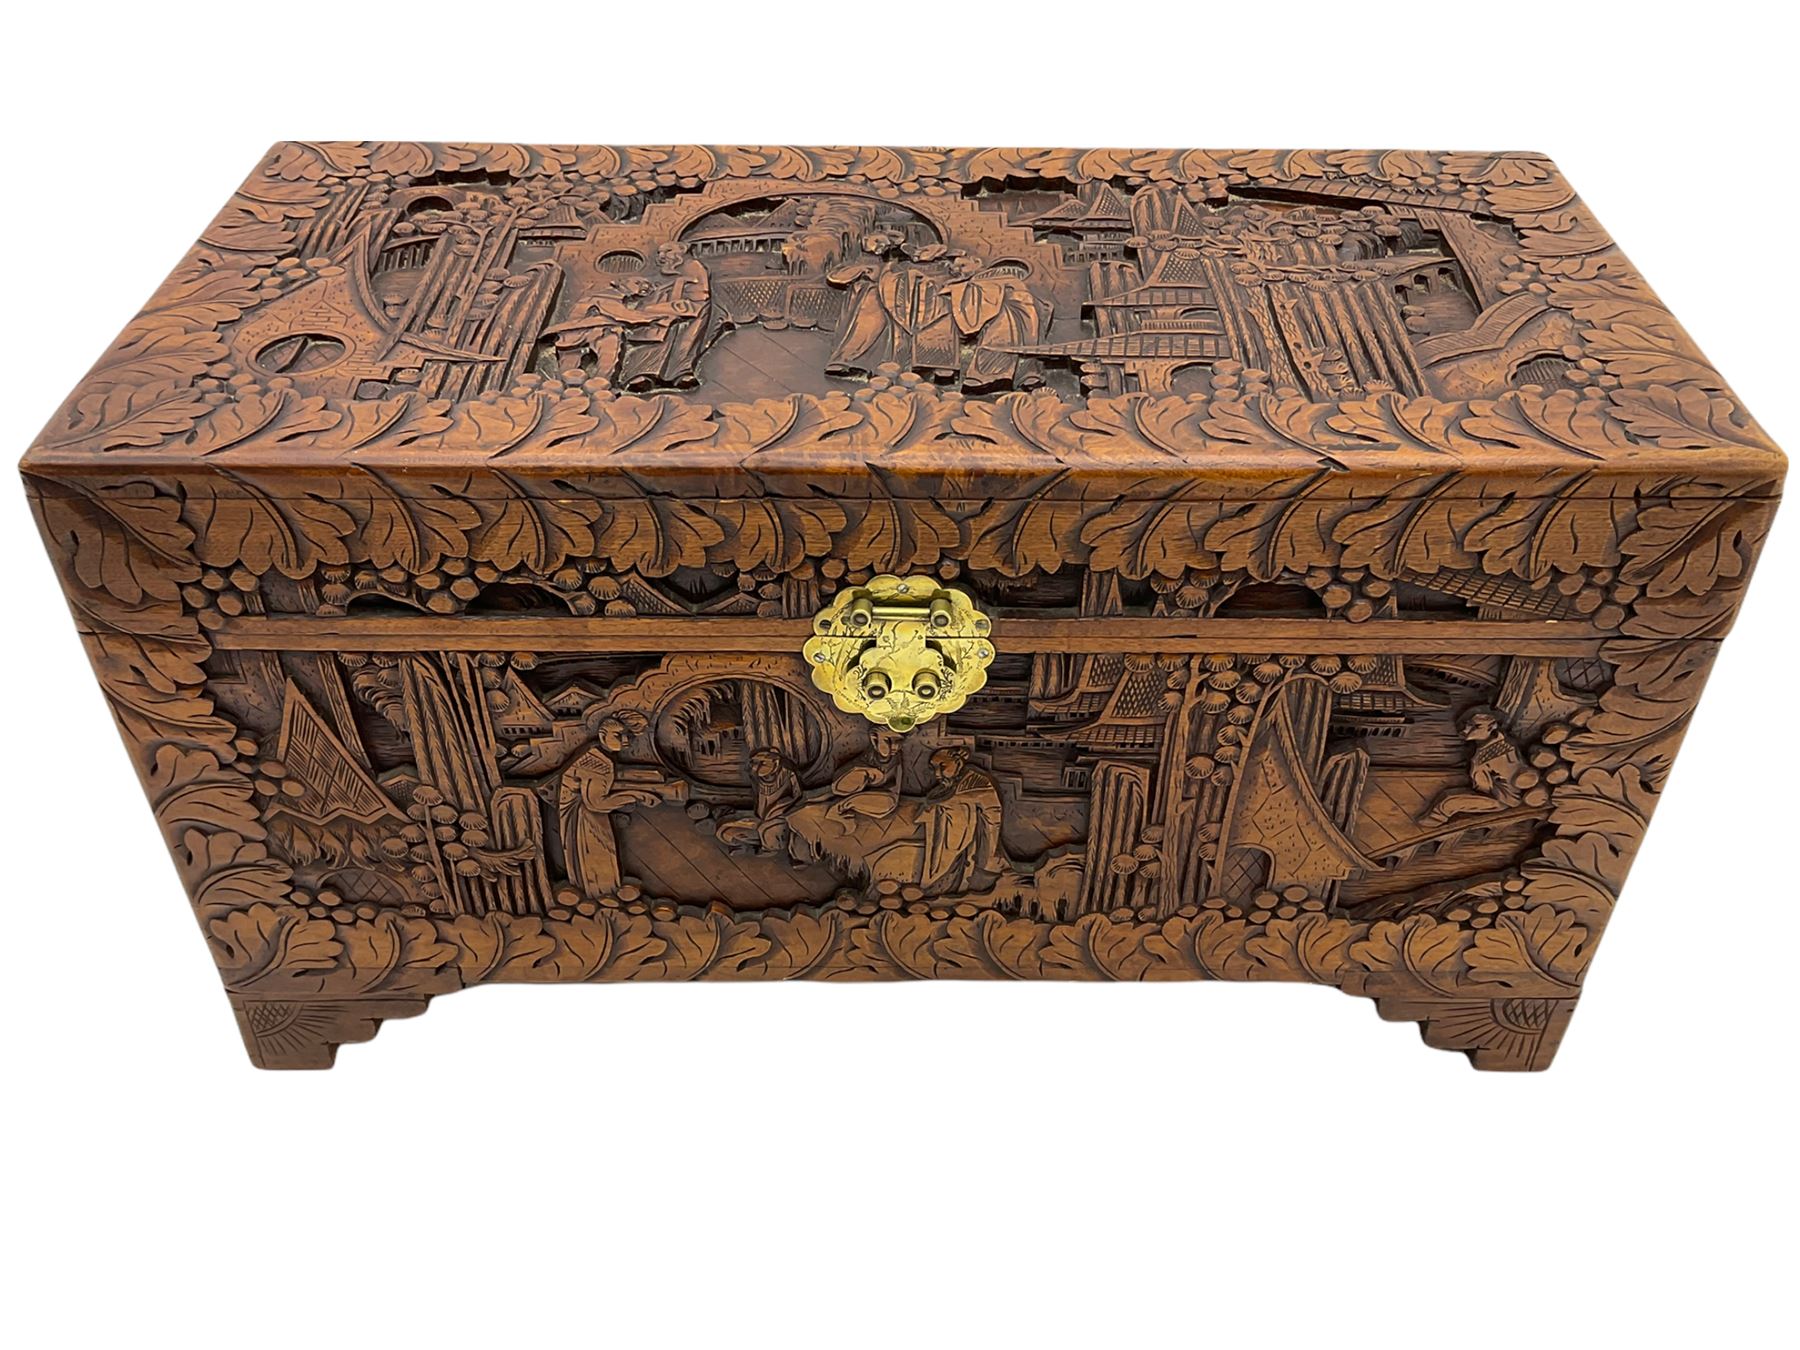 Chinese carved camphor wood blanket chest - Image 2 of 6